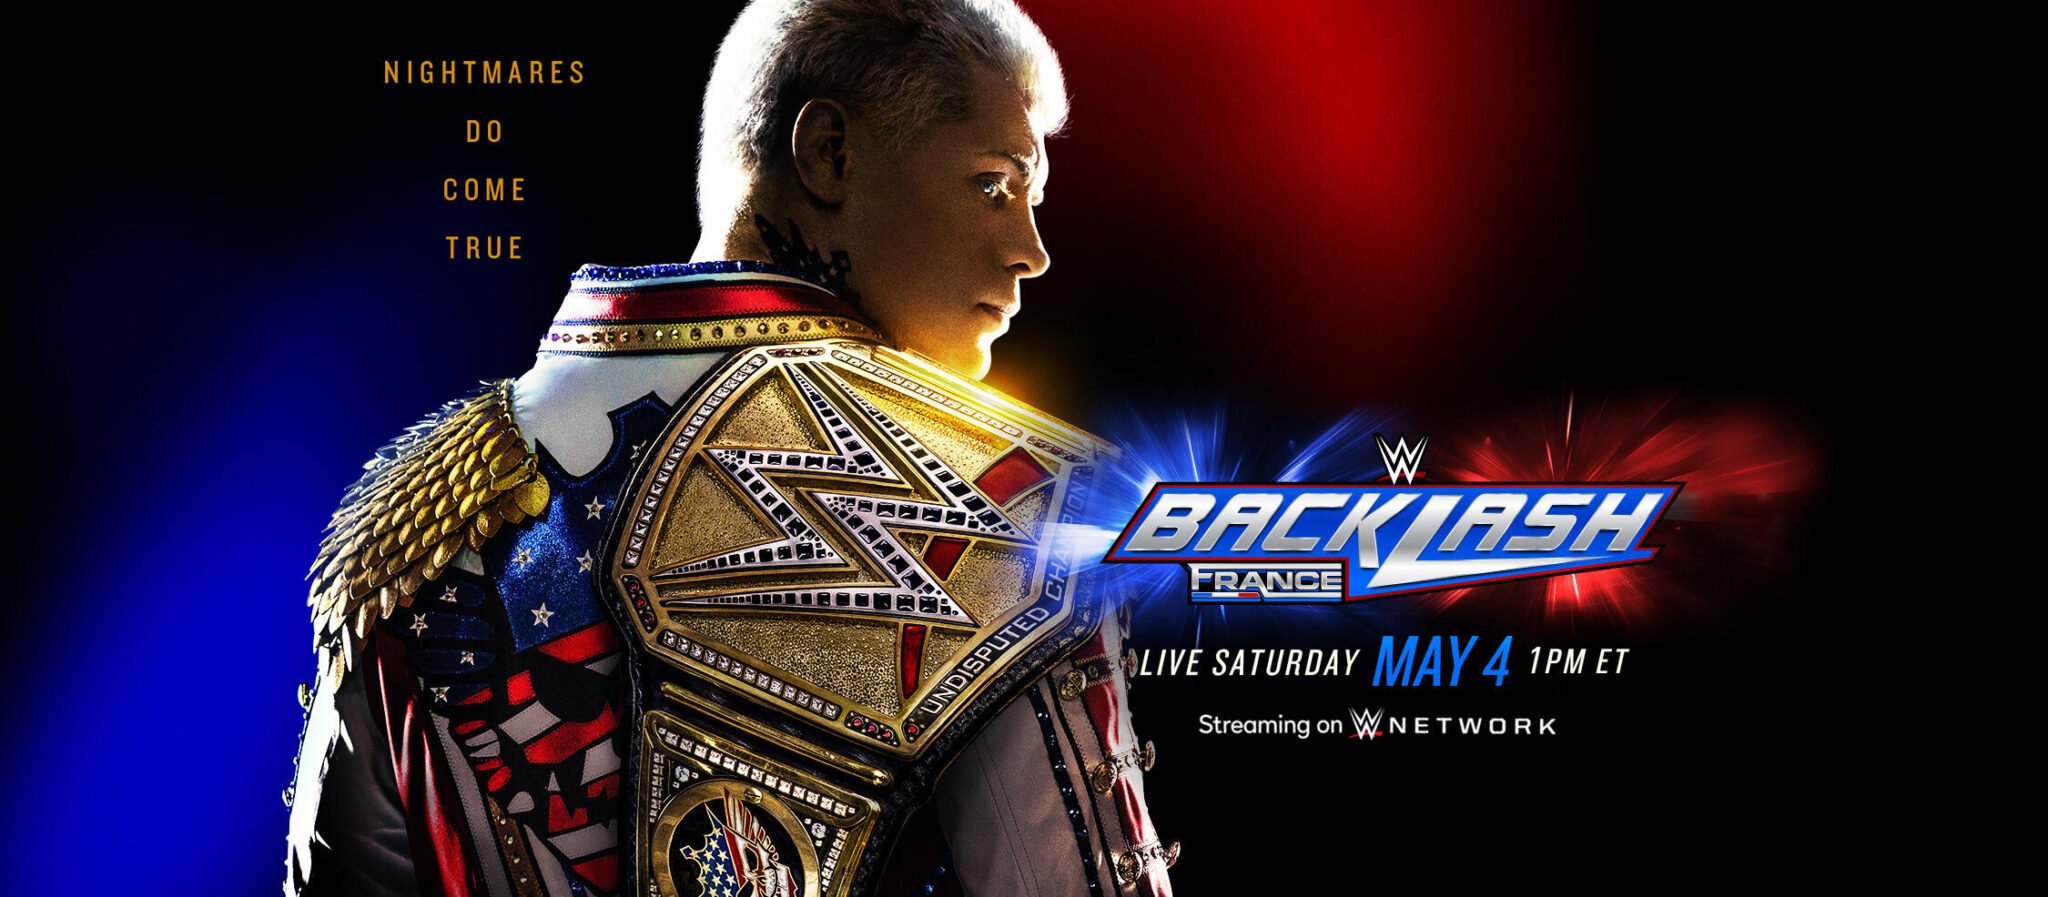 Two Prominent Figures from France Set to Appear at WWE Backlash